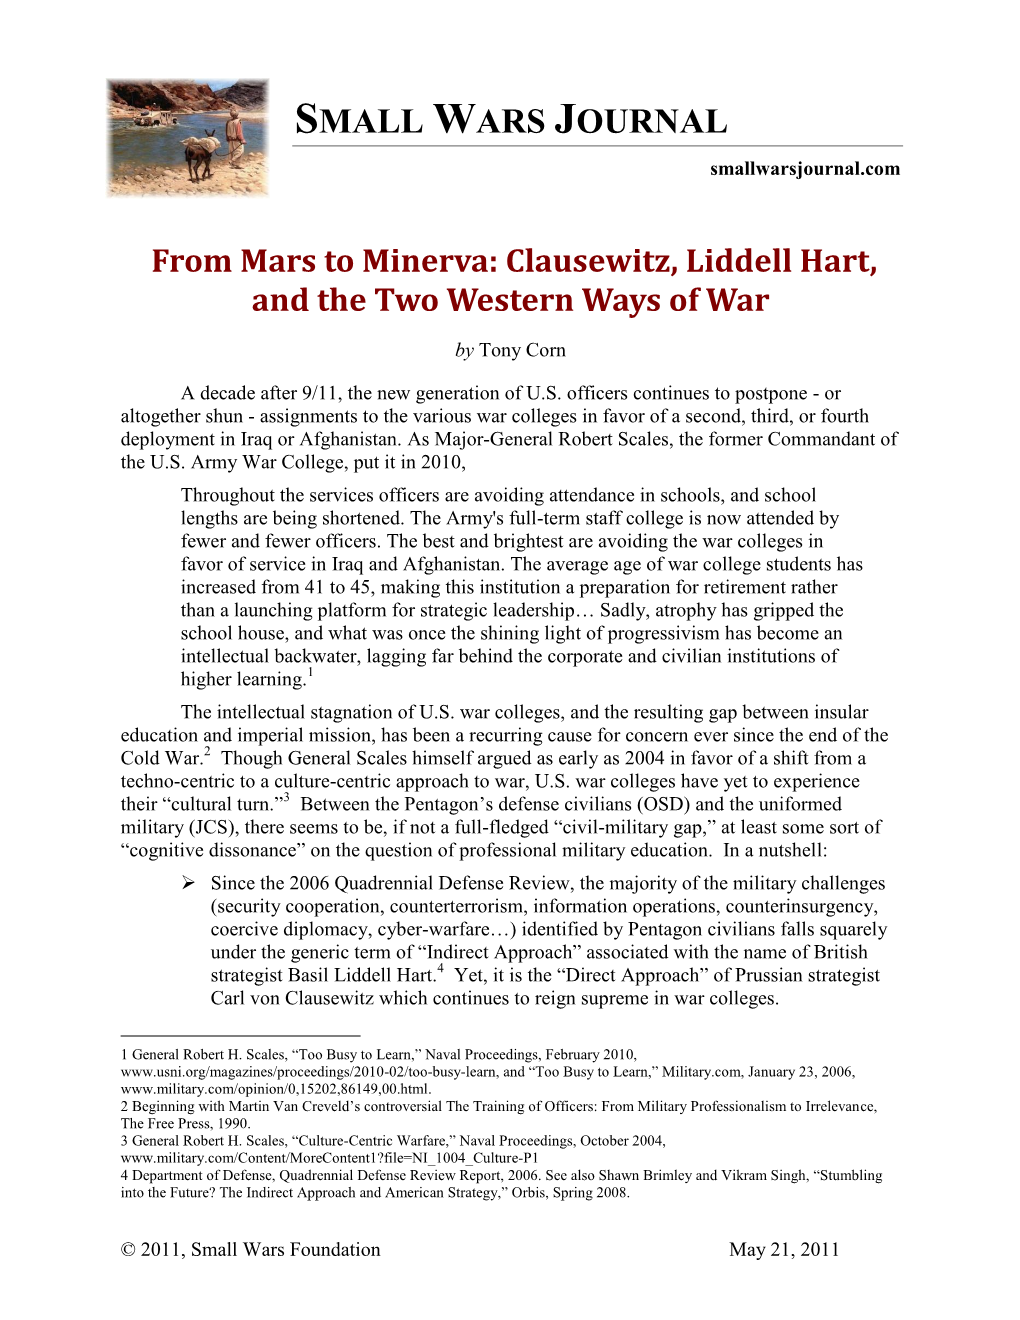 From Mars to Minerva: Clausewitz, Liddell Hart, and the Two Western Ways of War